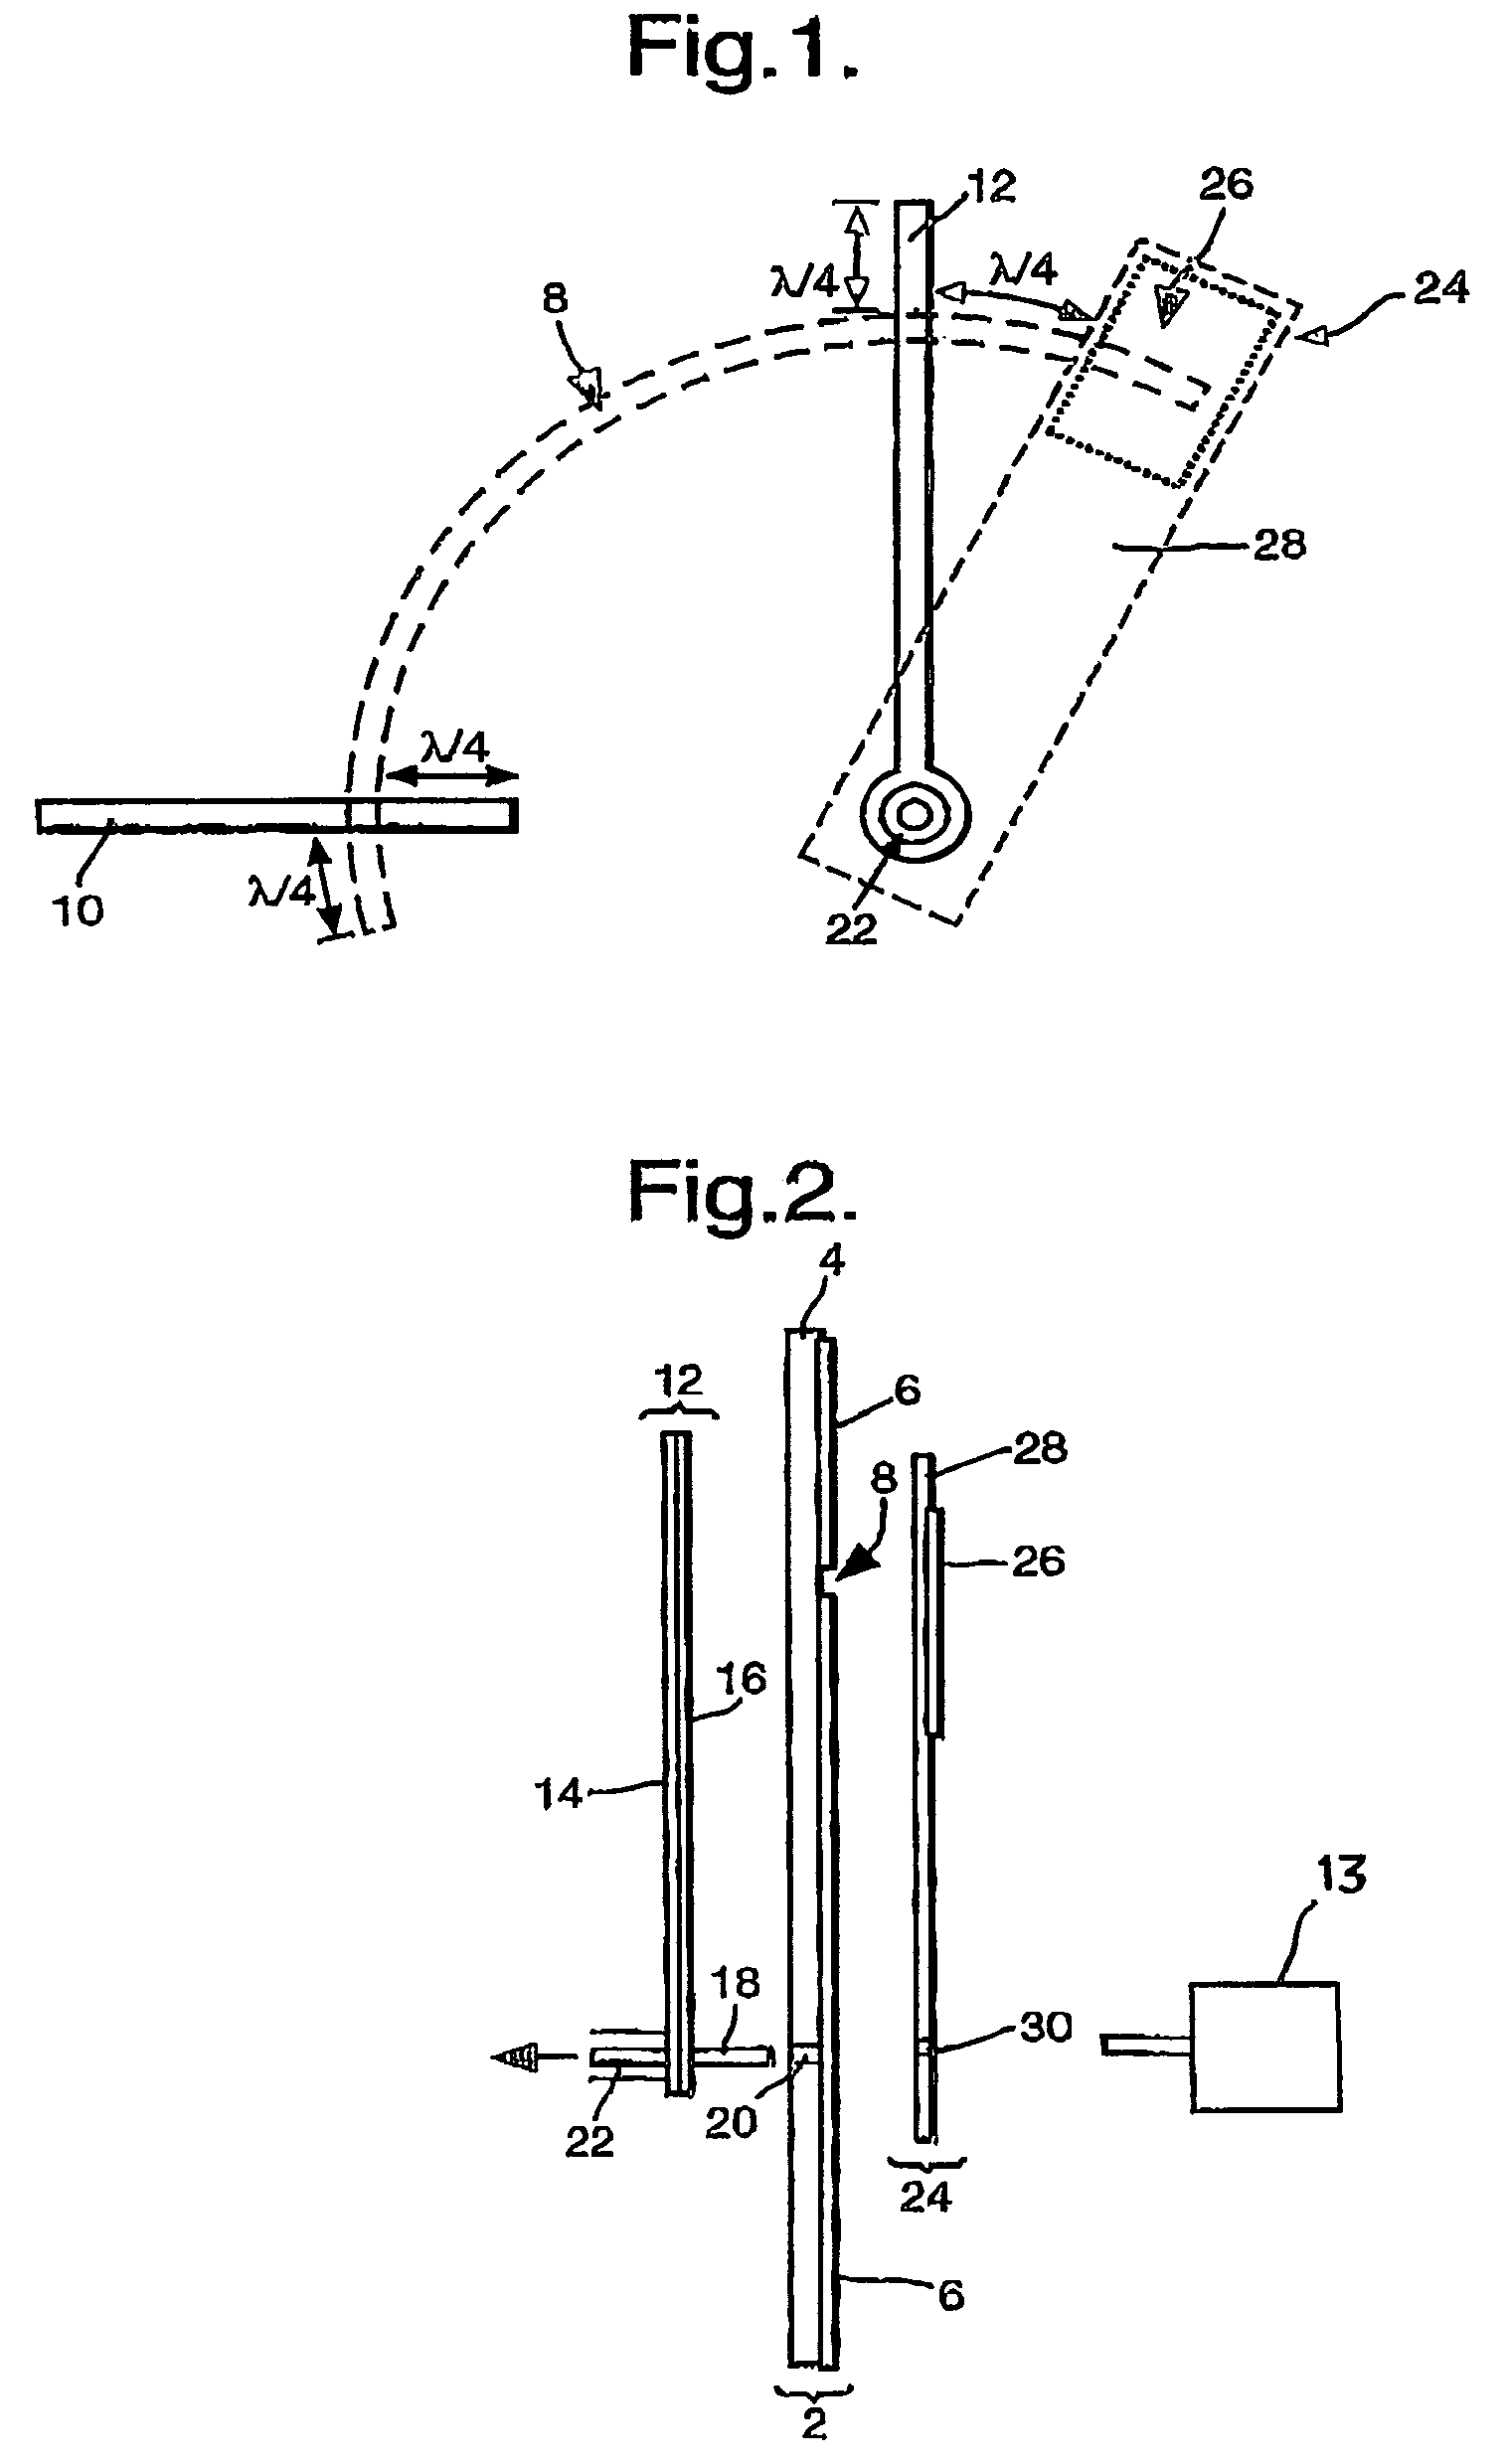 Phase shifter device having a microstrip waveguide and shorting patch movable along a slot line waveguide